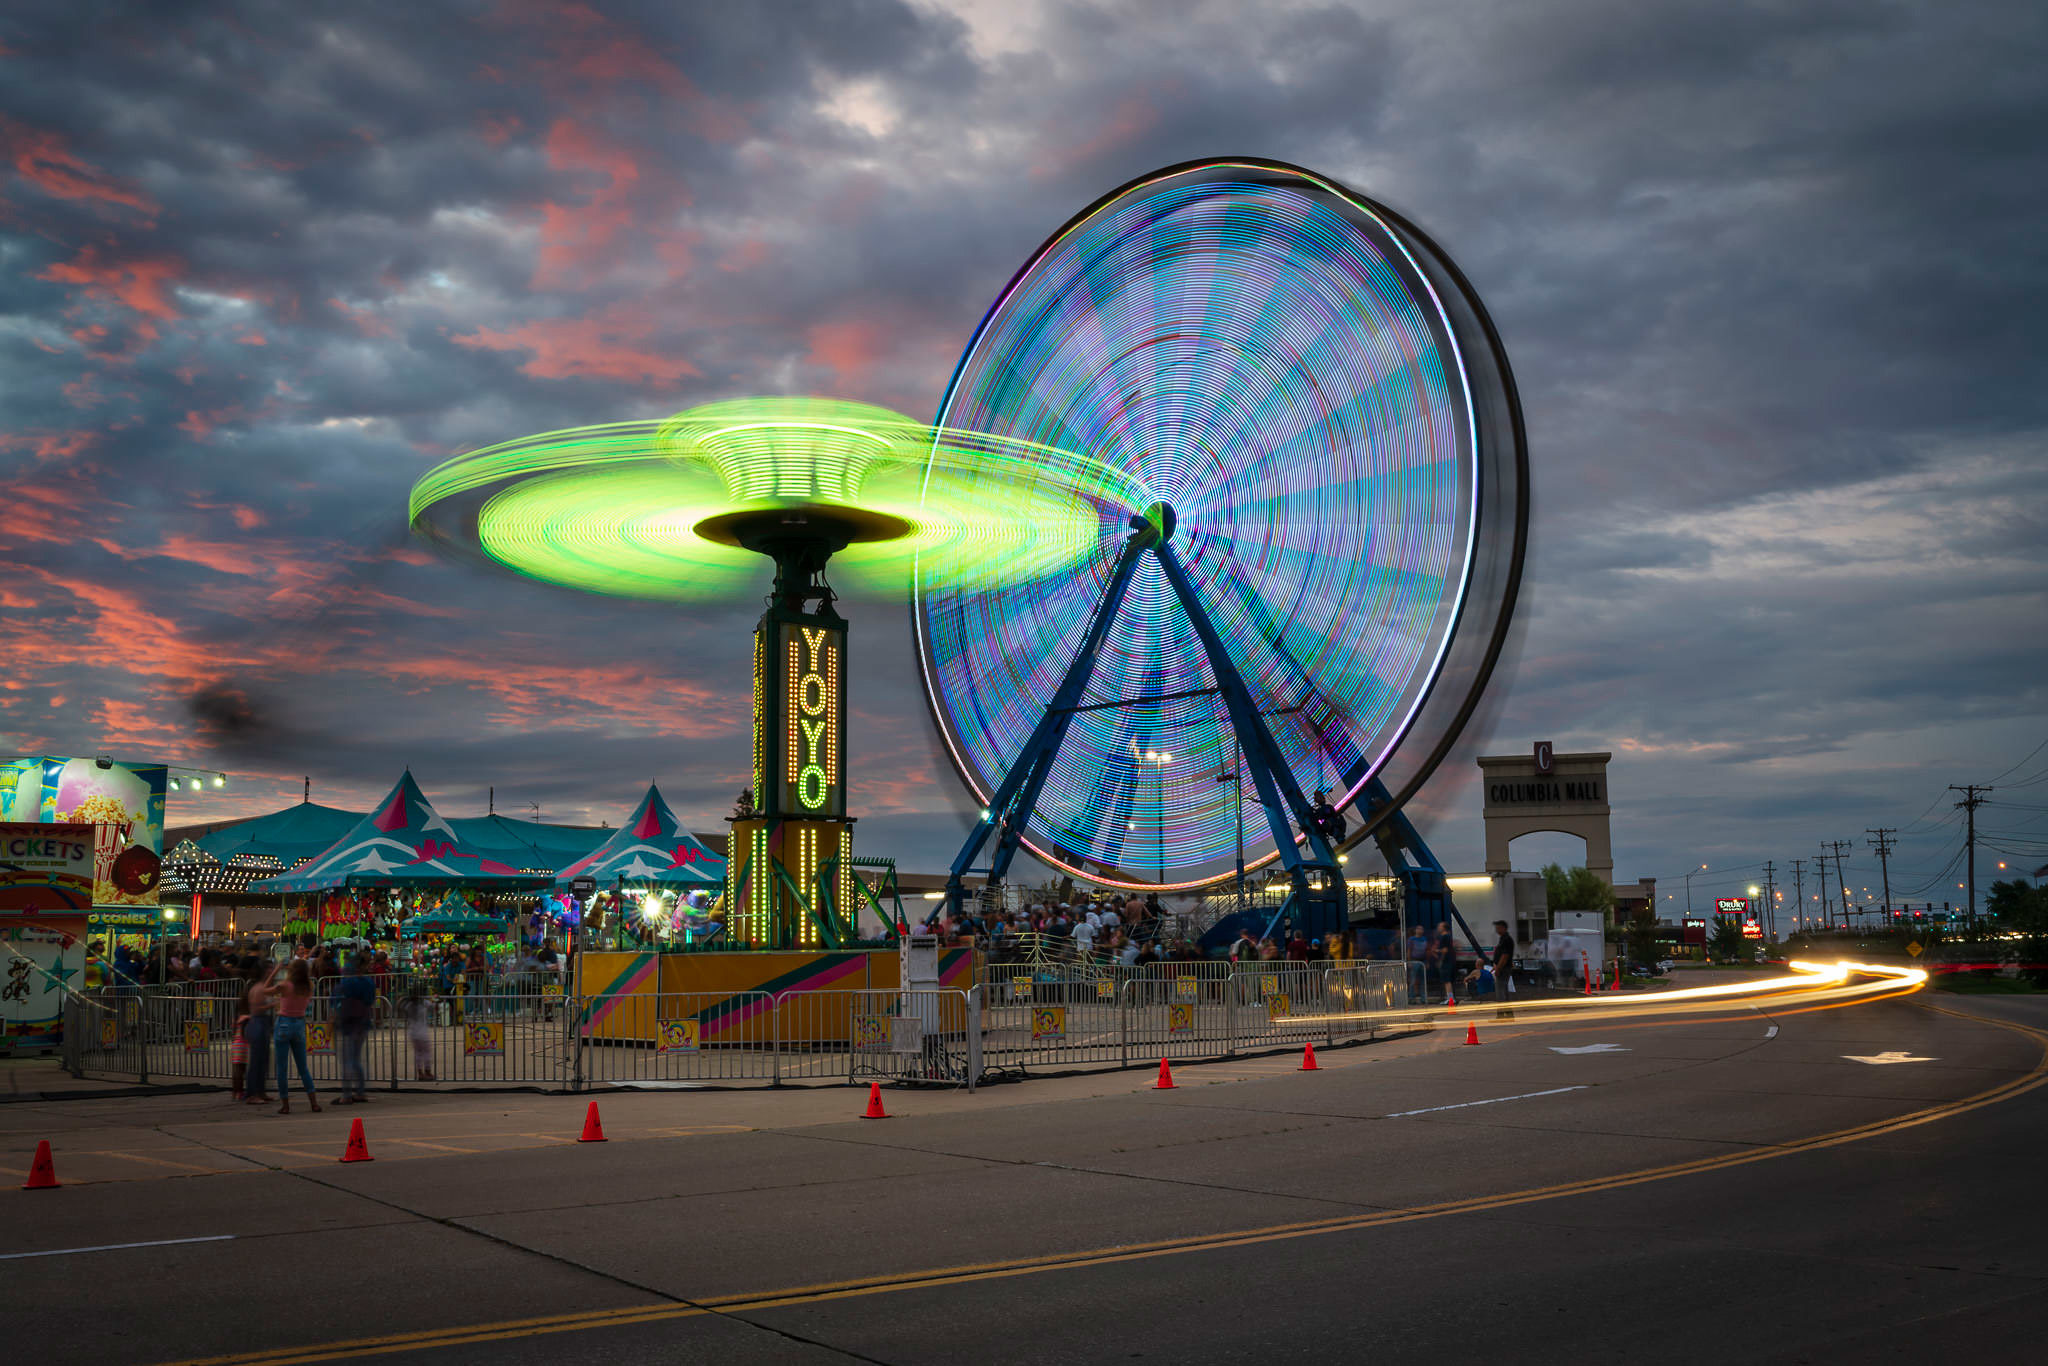 A long exposure photograph of a carnival at dusk.